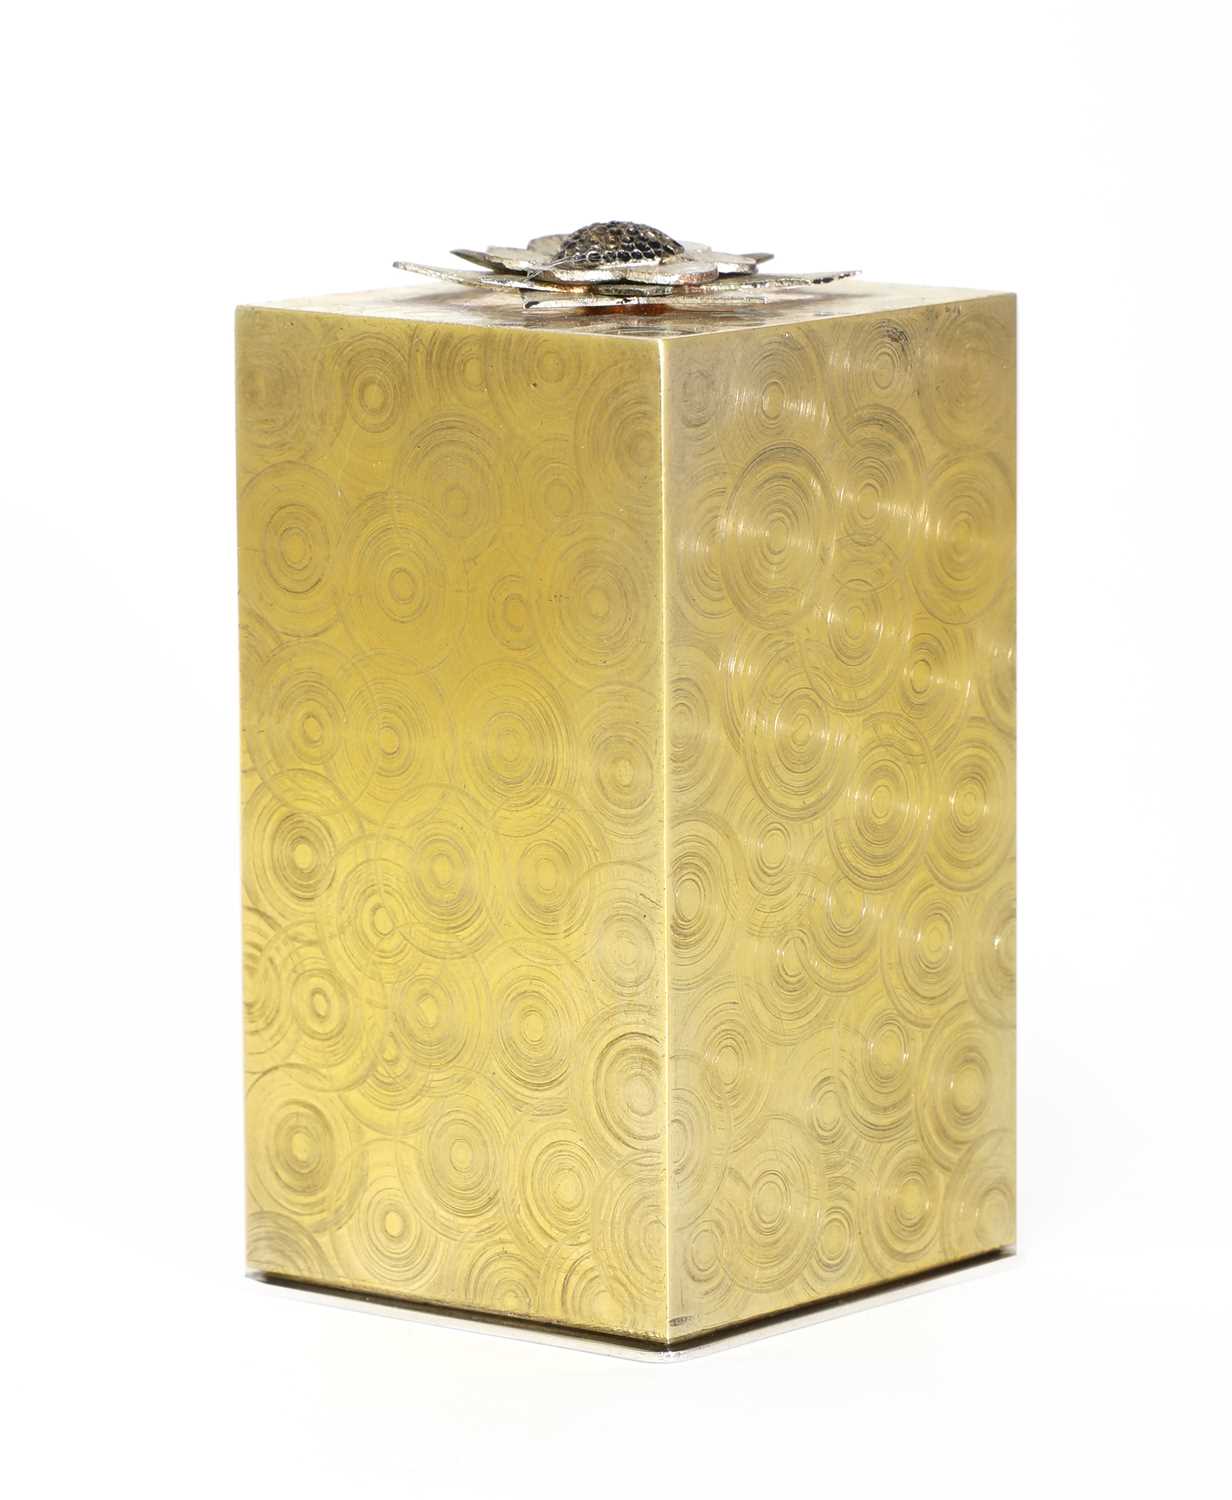 A novelty silver-gilt and enamel 'Surprise' box, - Image 3 of 4